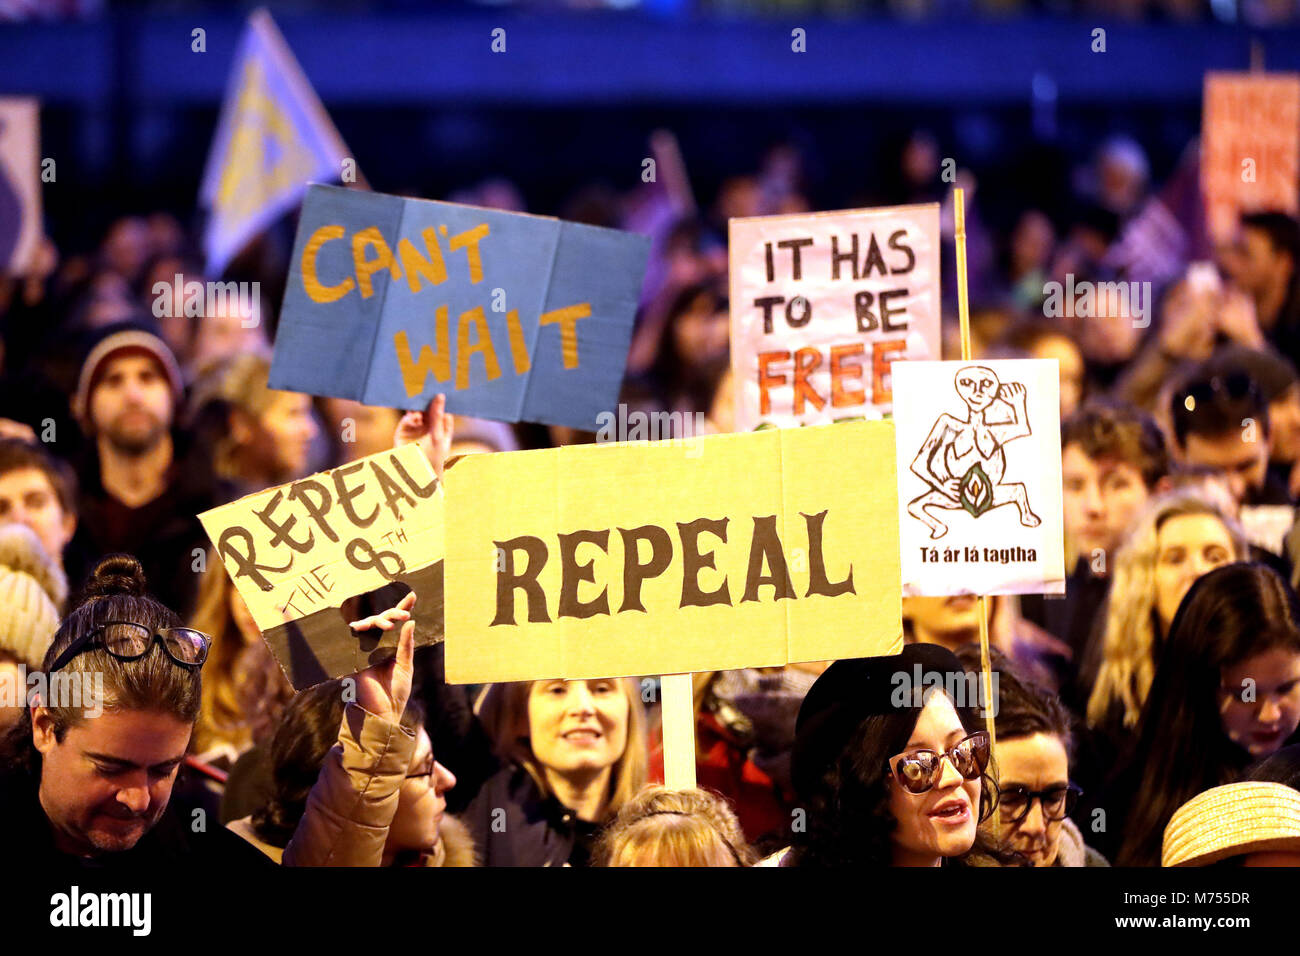 People carrying various signs, as participants take part in a march through Dublin city centre calling for the repeal of the 8th amendment to the Irish constitution. Stock Photo